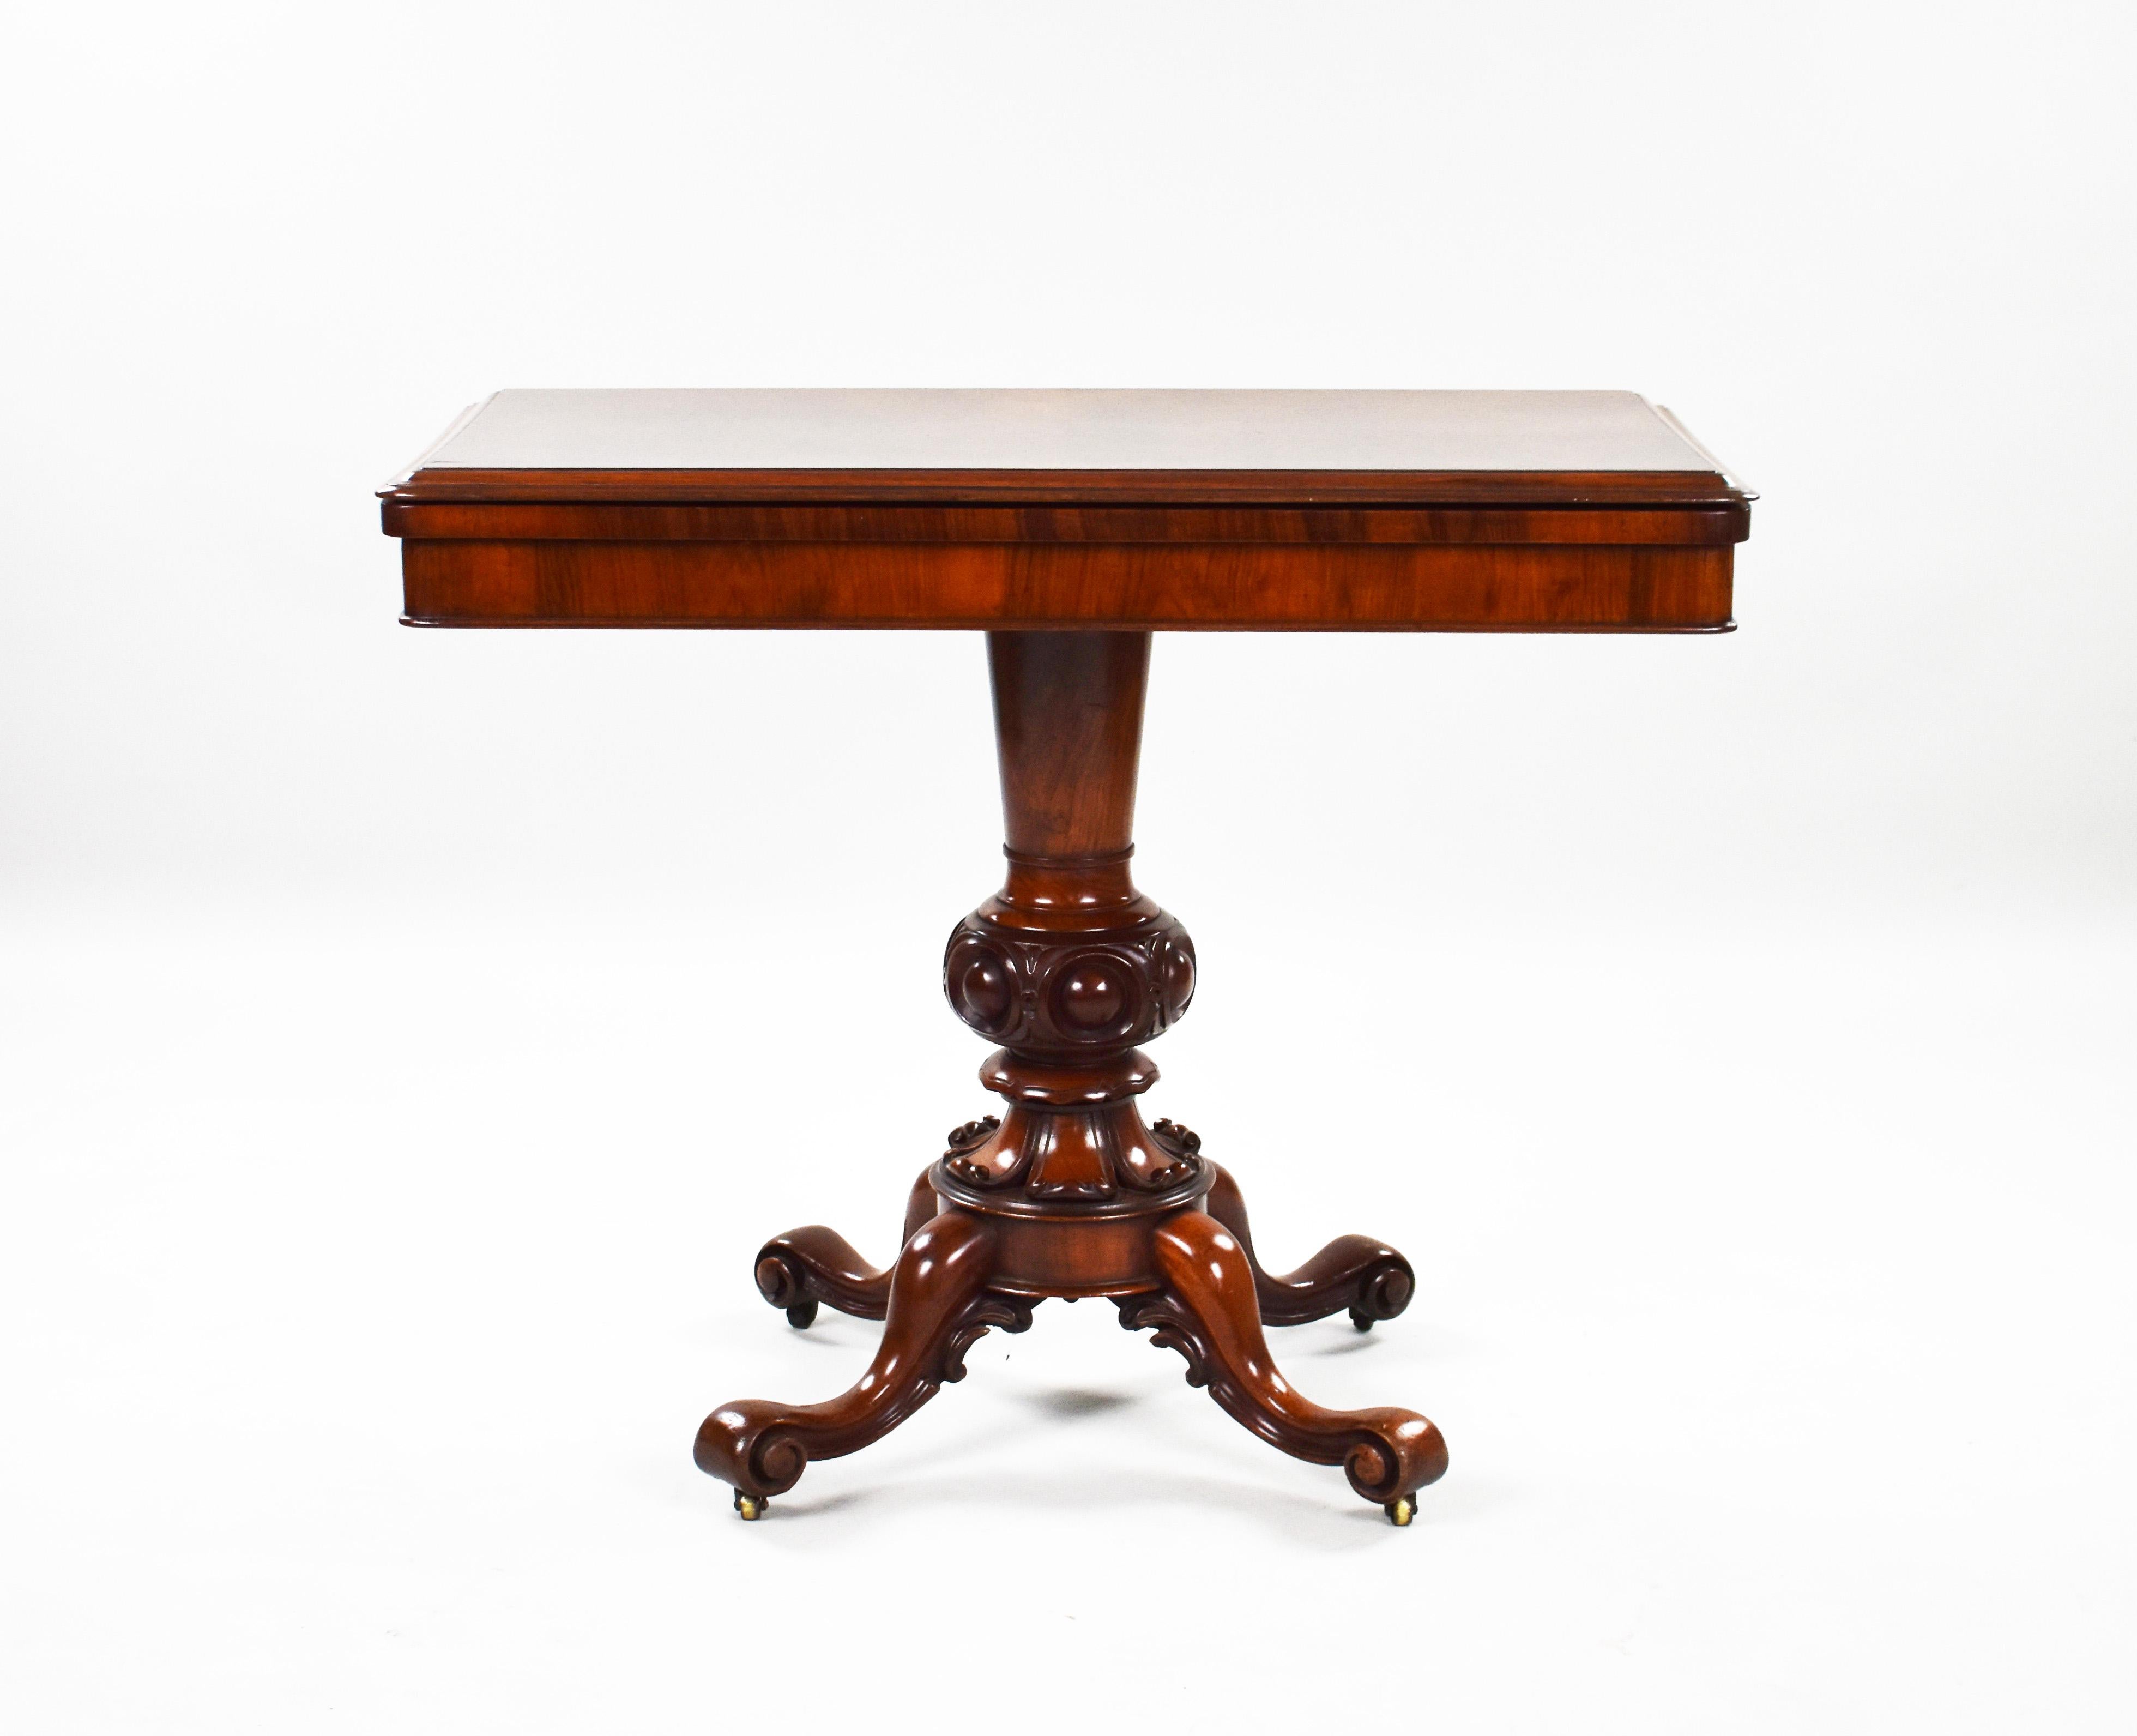 For sale is a good quality Victorian burr walnut fold over card table. Opening to a circular green baise lined interior, above a turned and carved stem standing on ornate legs raised on castors. This piece is in very good condition for its